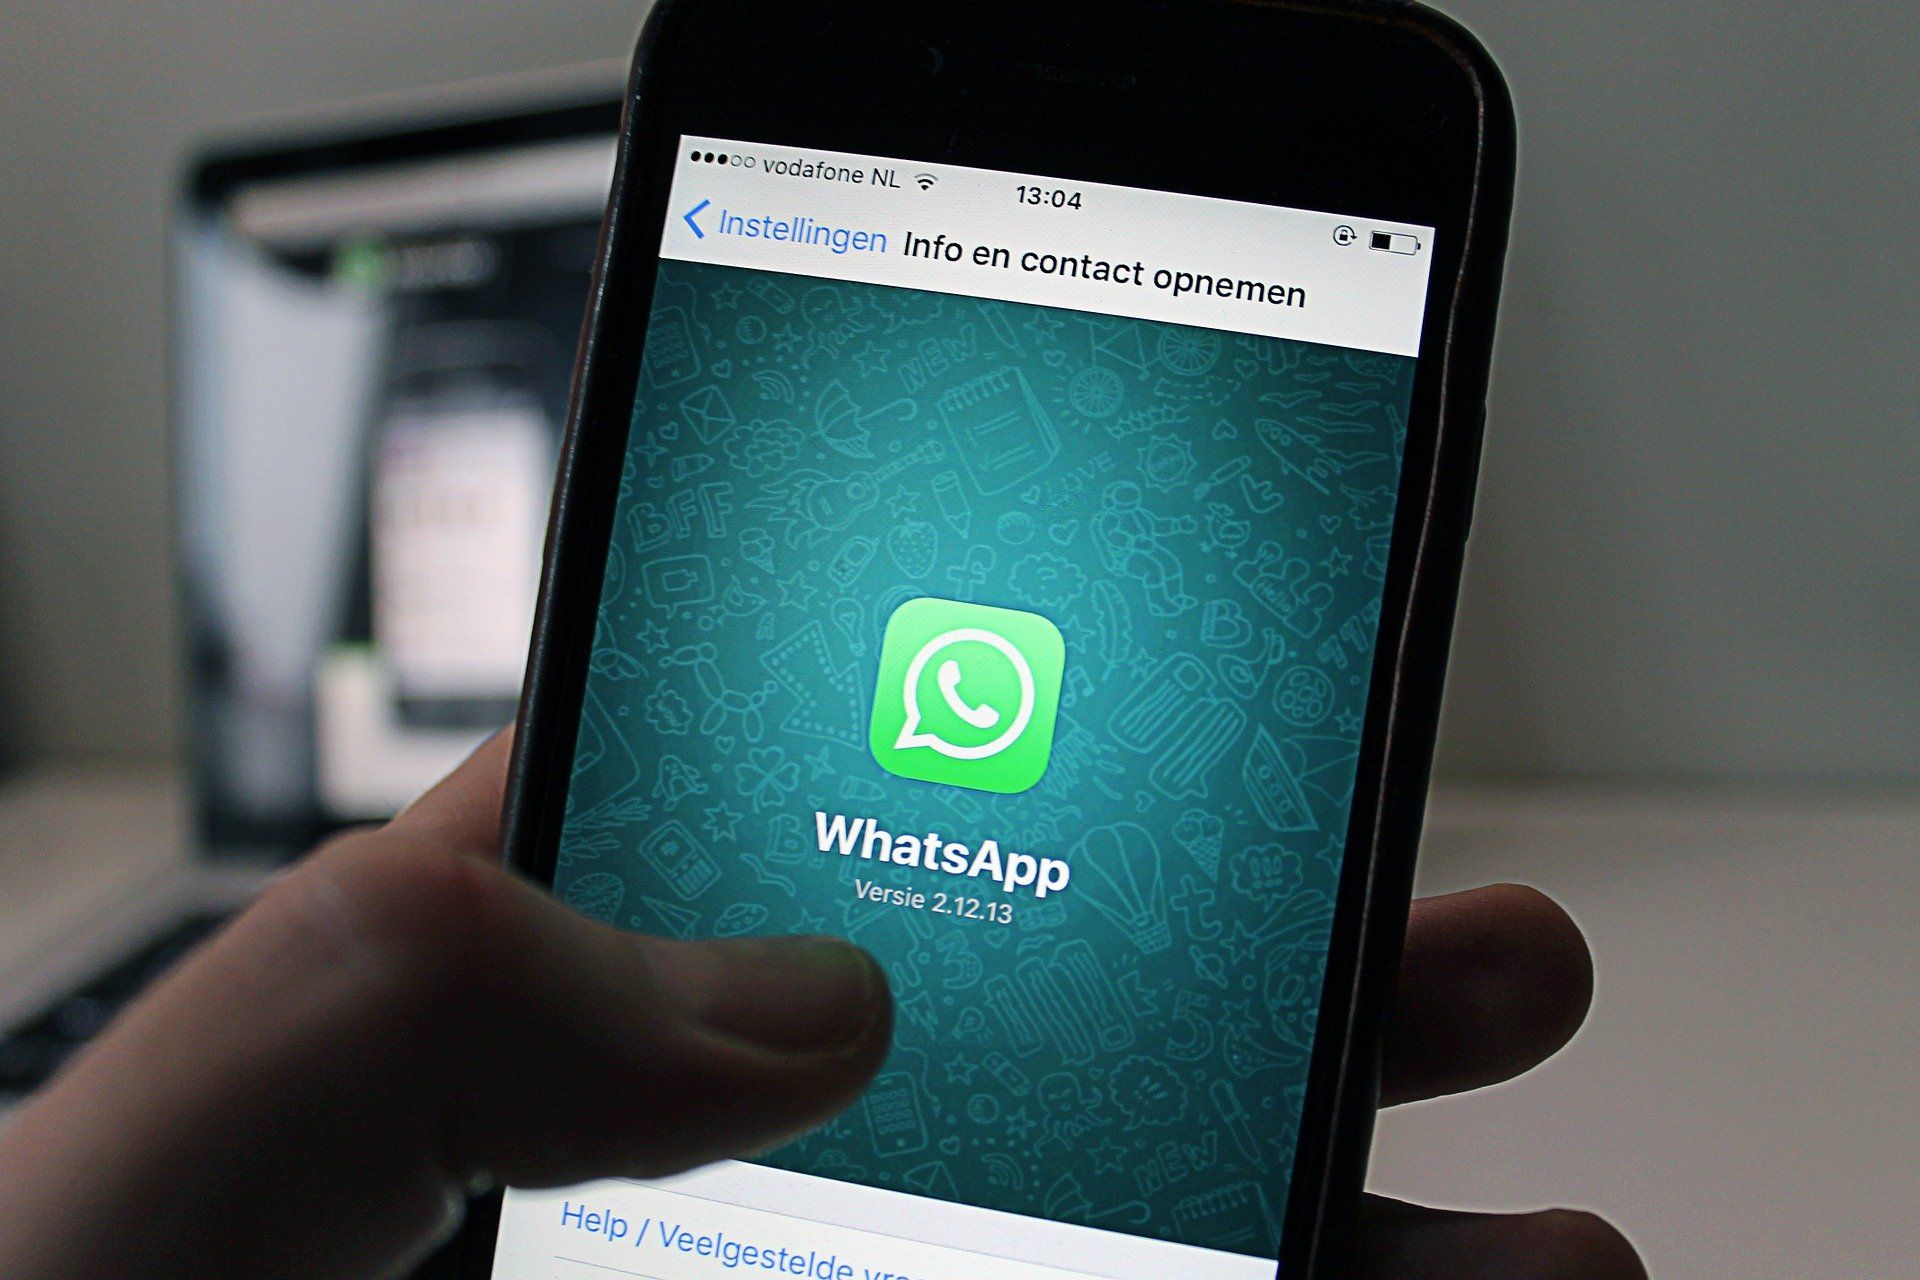 WhatsApp, Facebook down for users, company says ‘working on it’